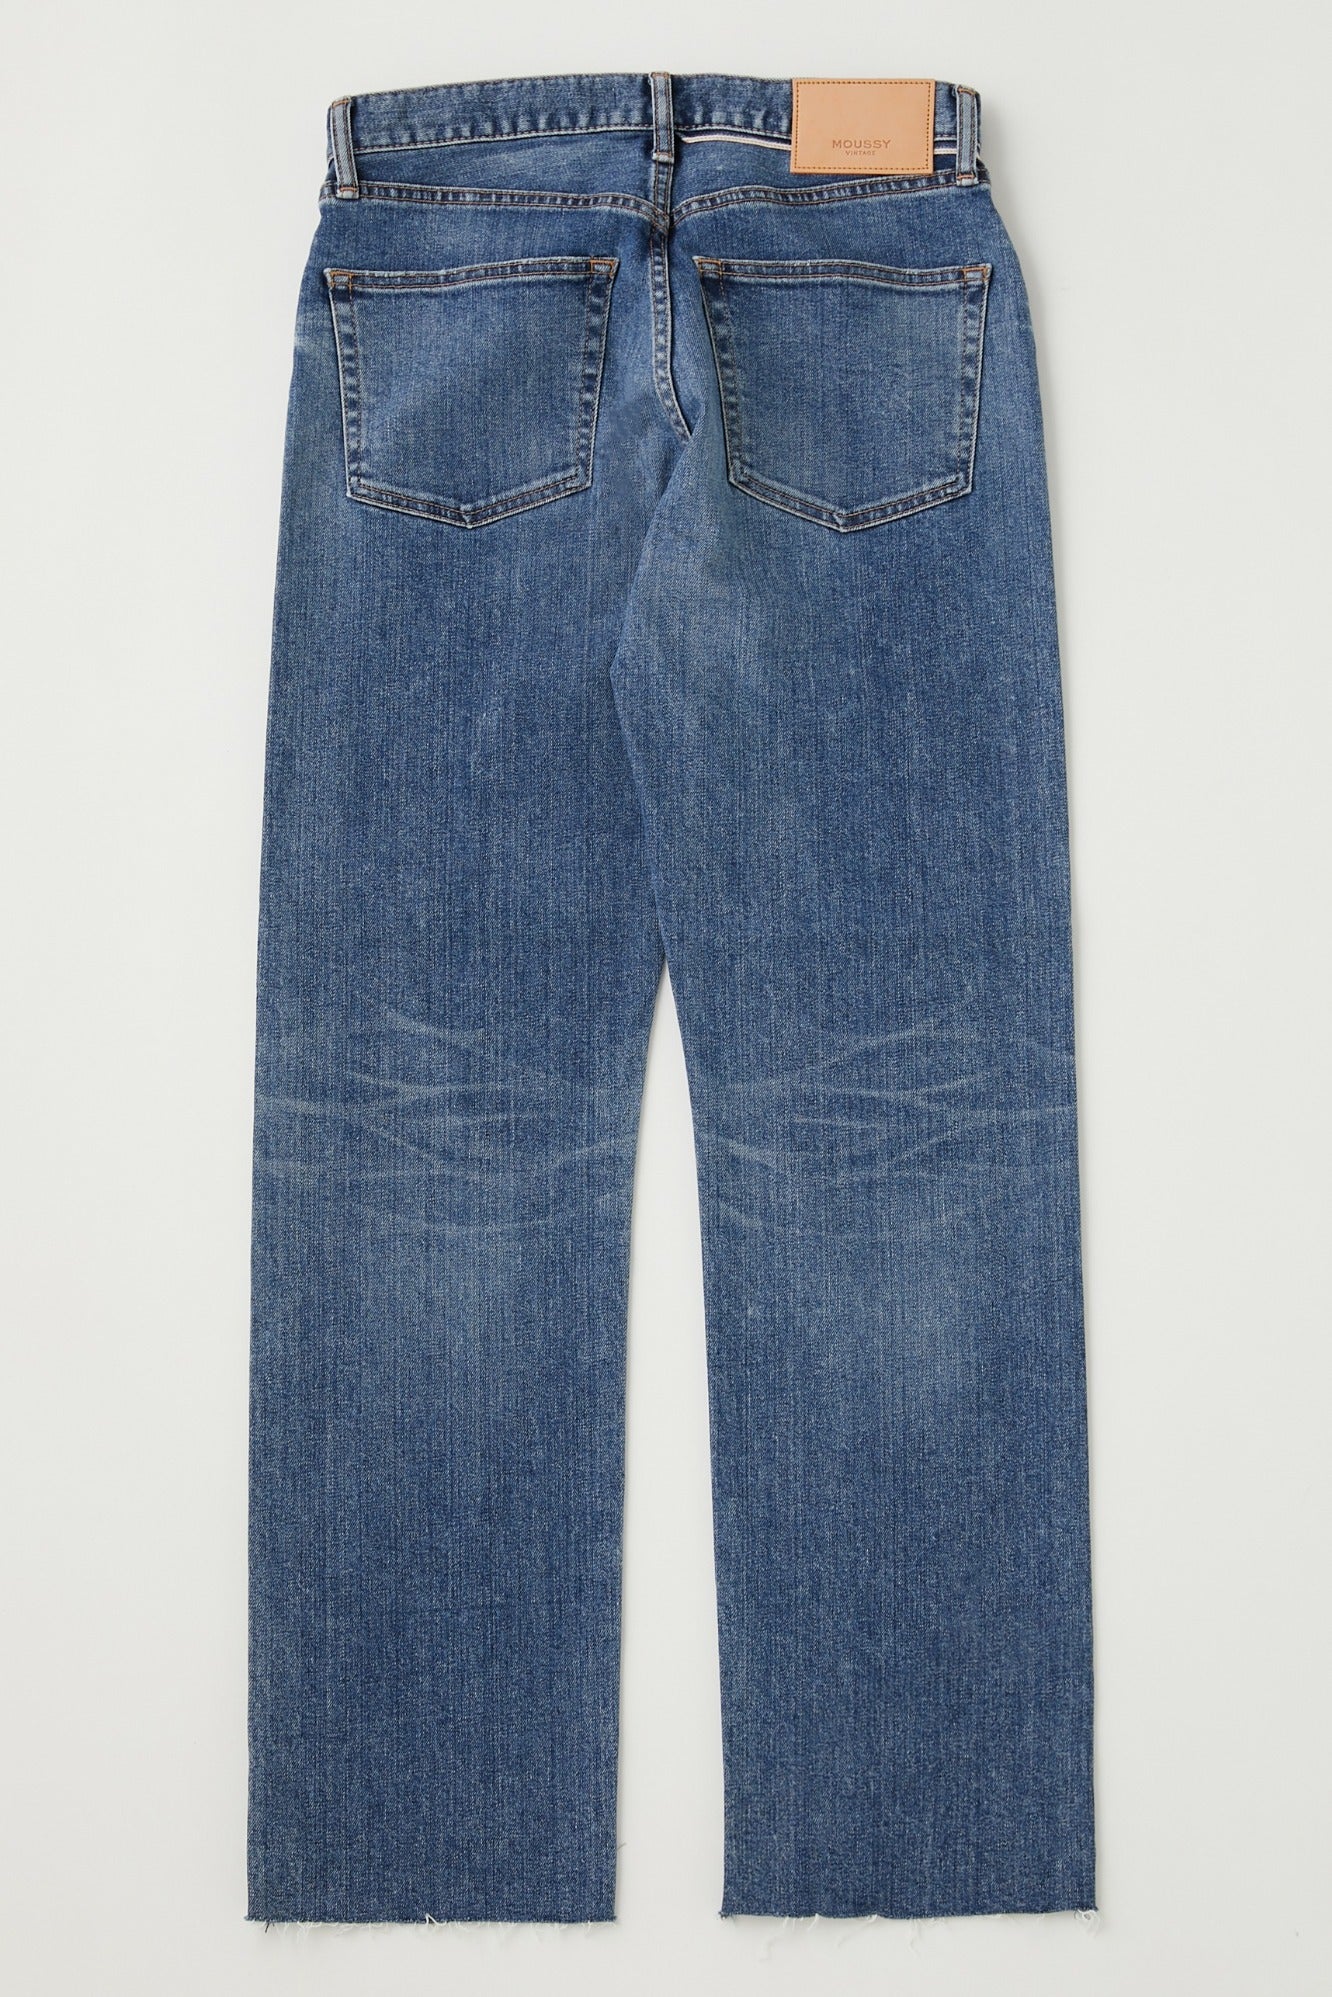 Moussy Harris Straight Jeans